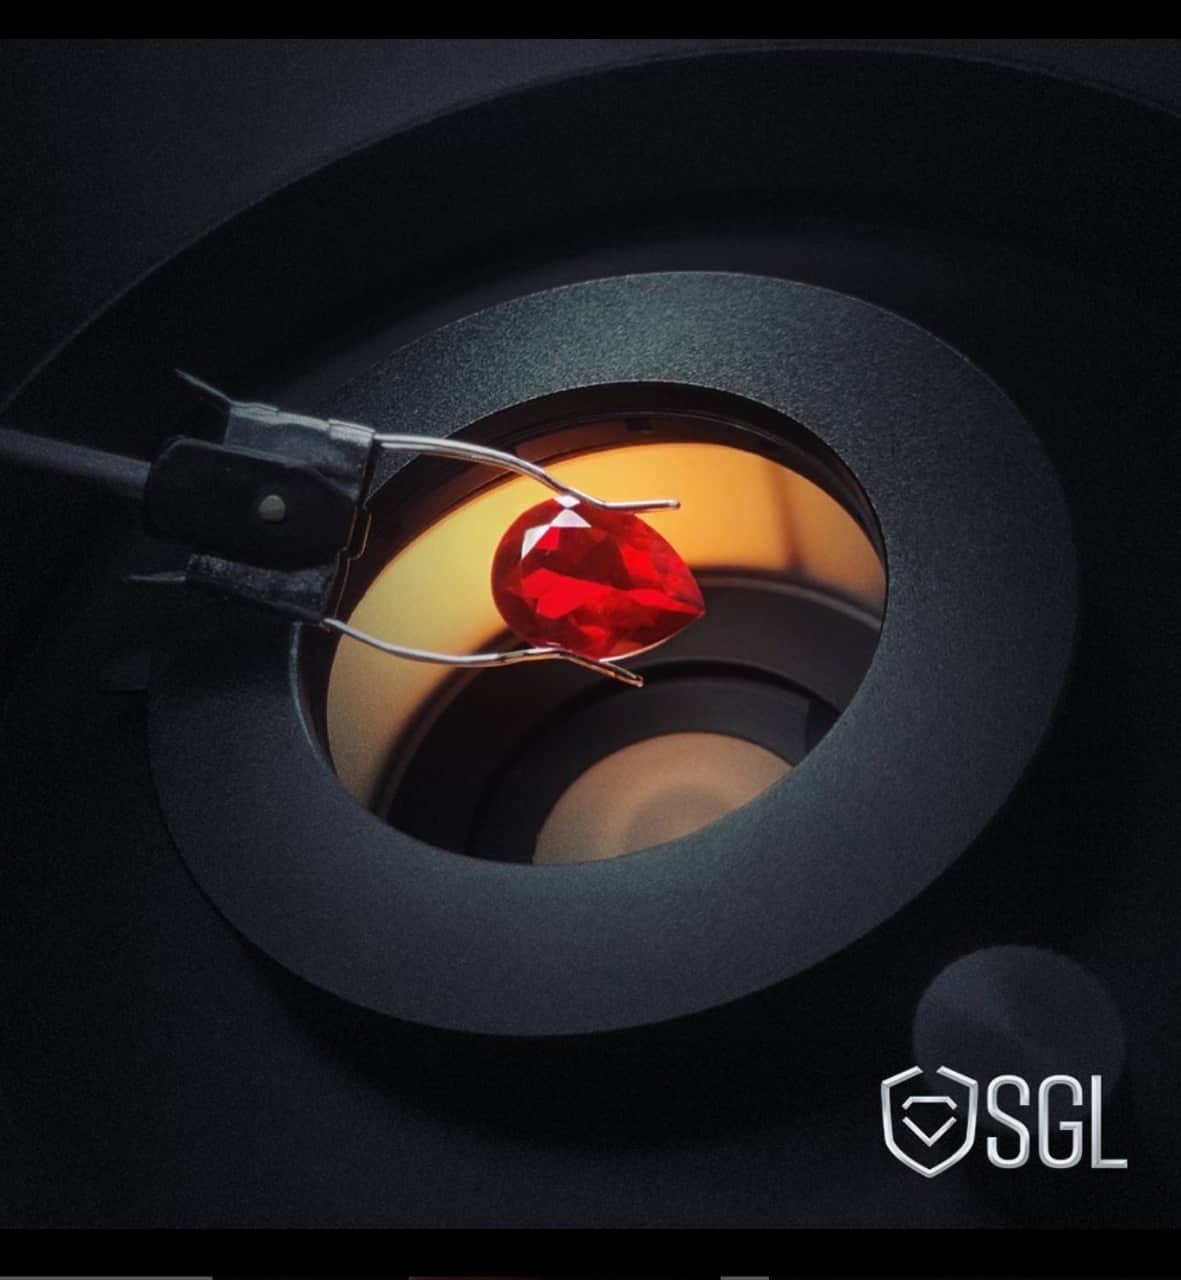 Red gemstone in a grading machine used on the London landing page for SGL.